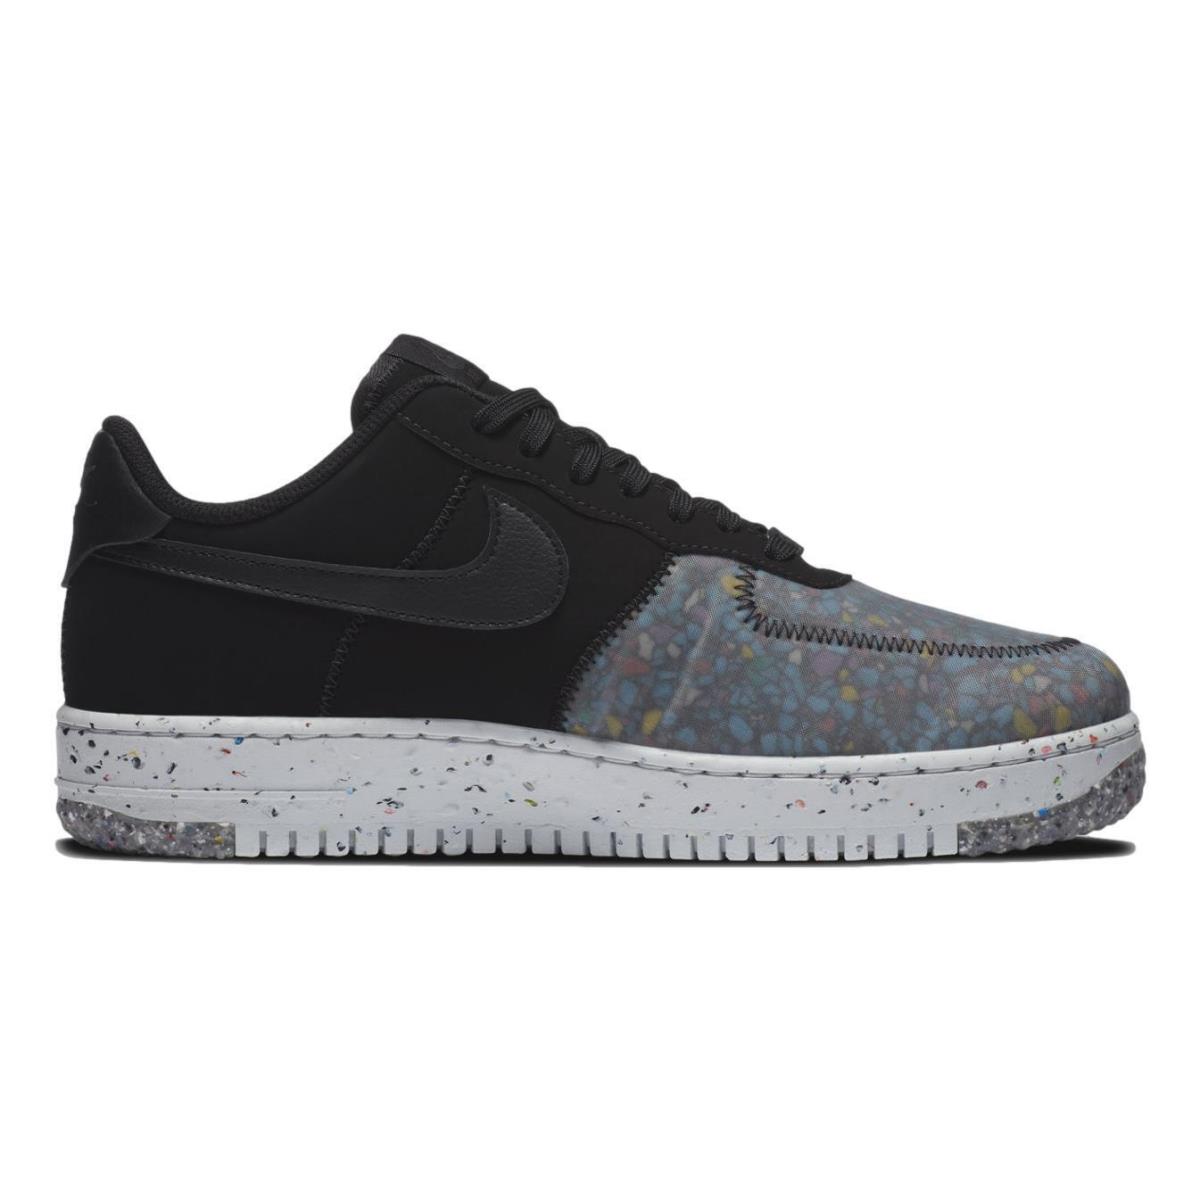 Nike shoes Air Force Crater - Black/Black-Photon Dust 2